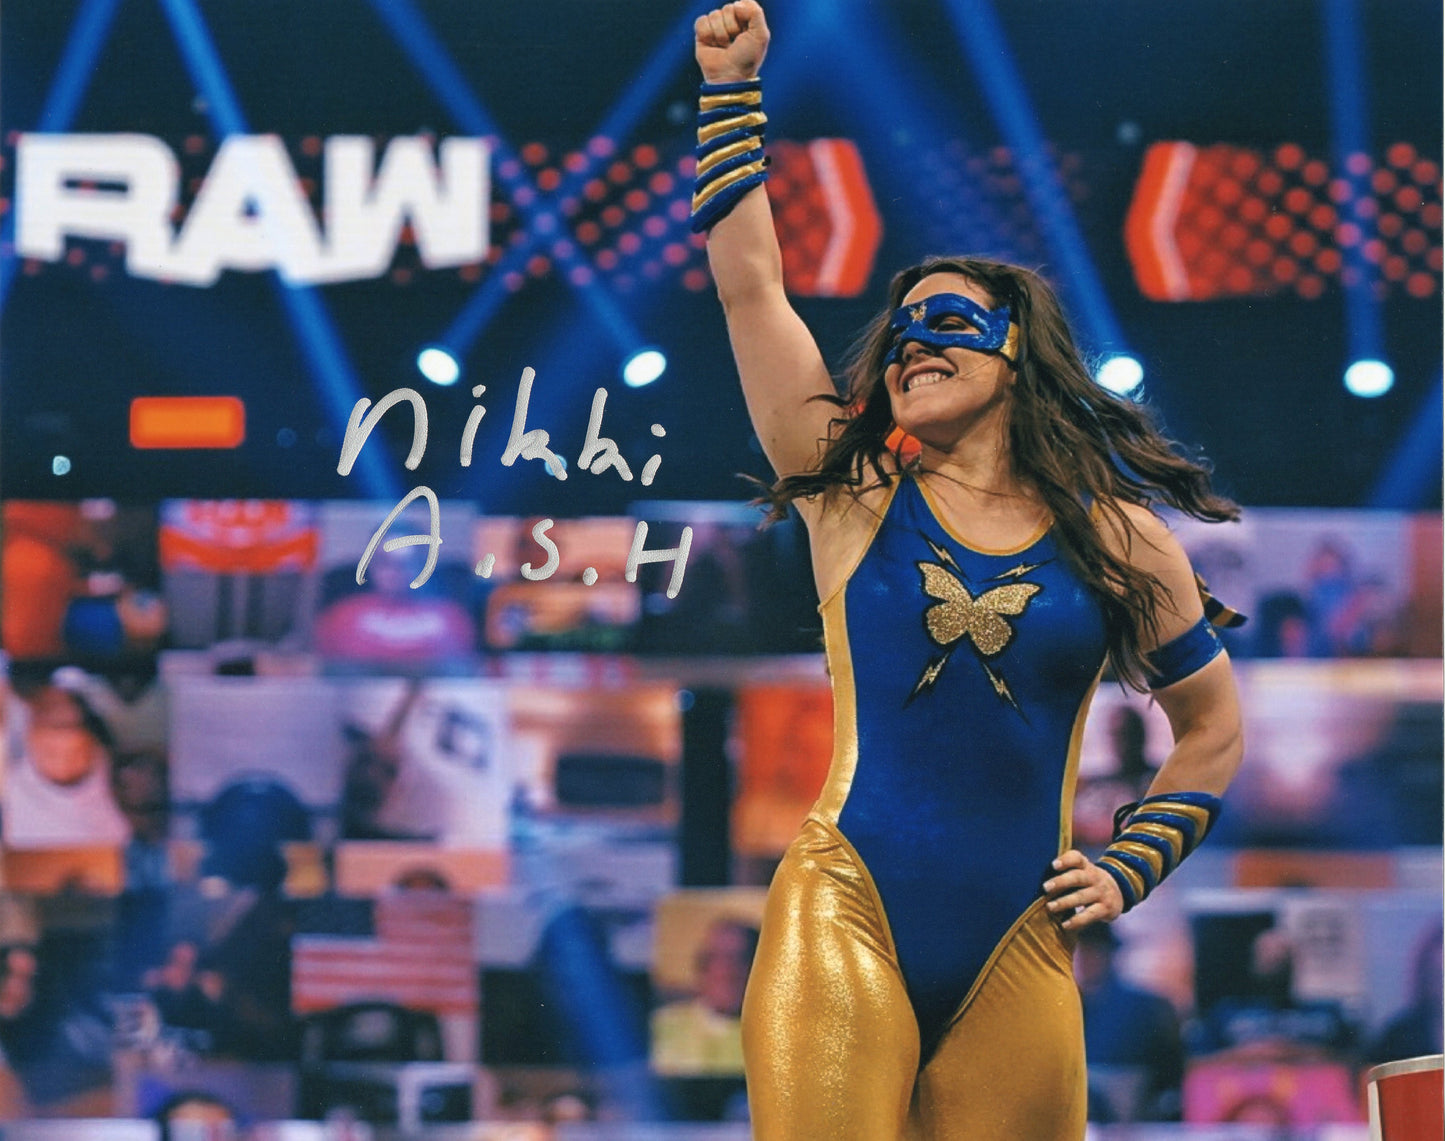 Nikki A.S.H WWE Signed Photo